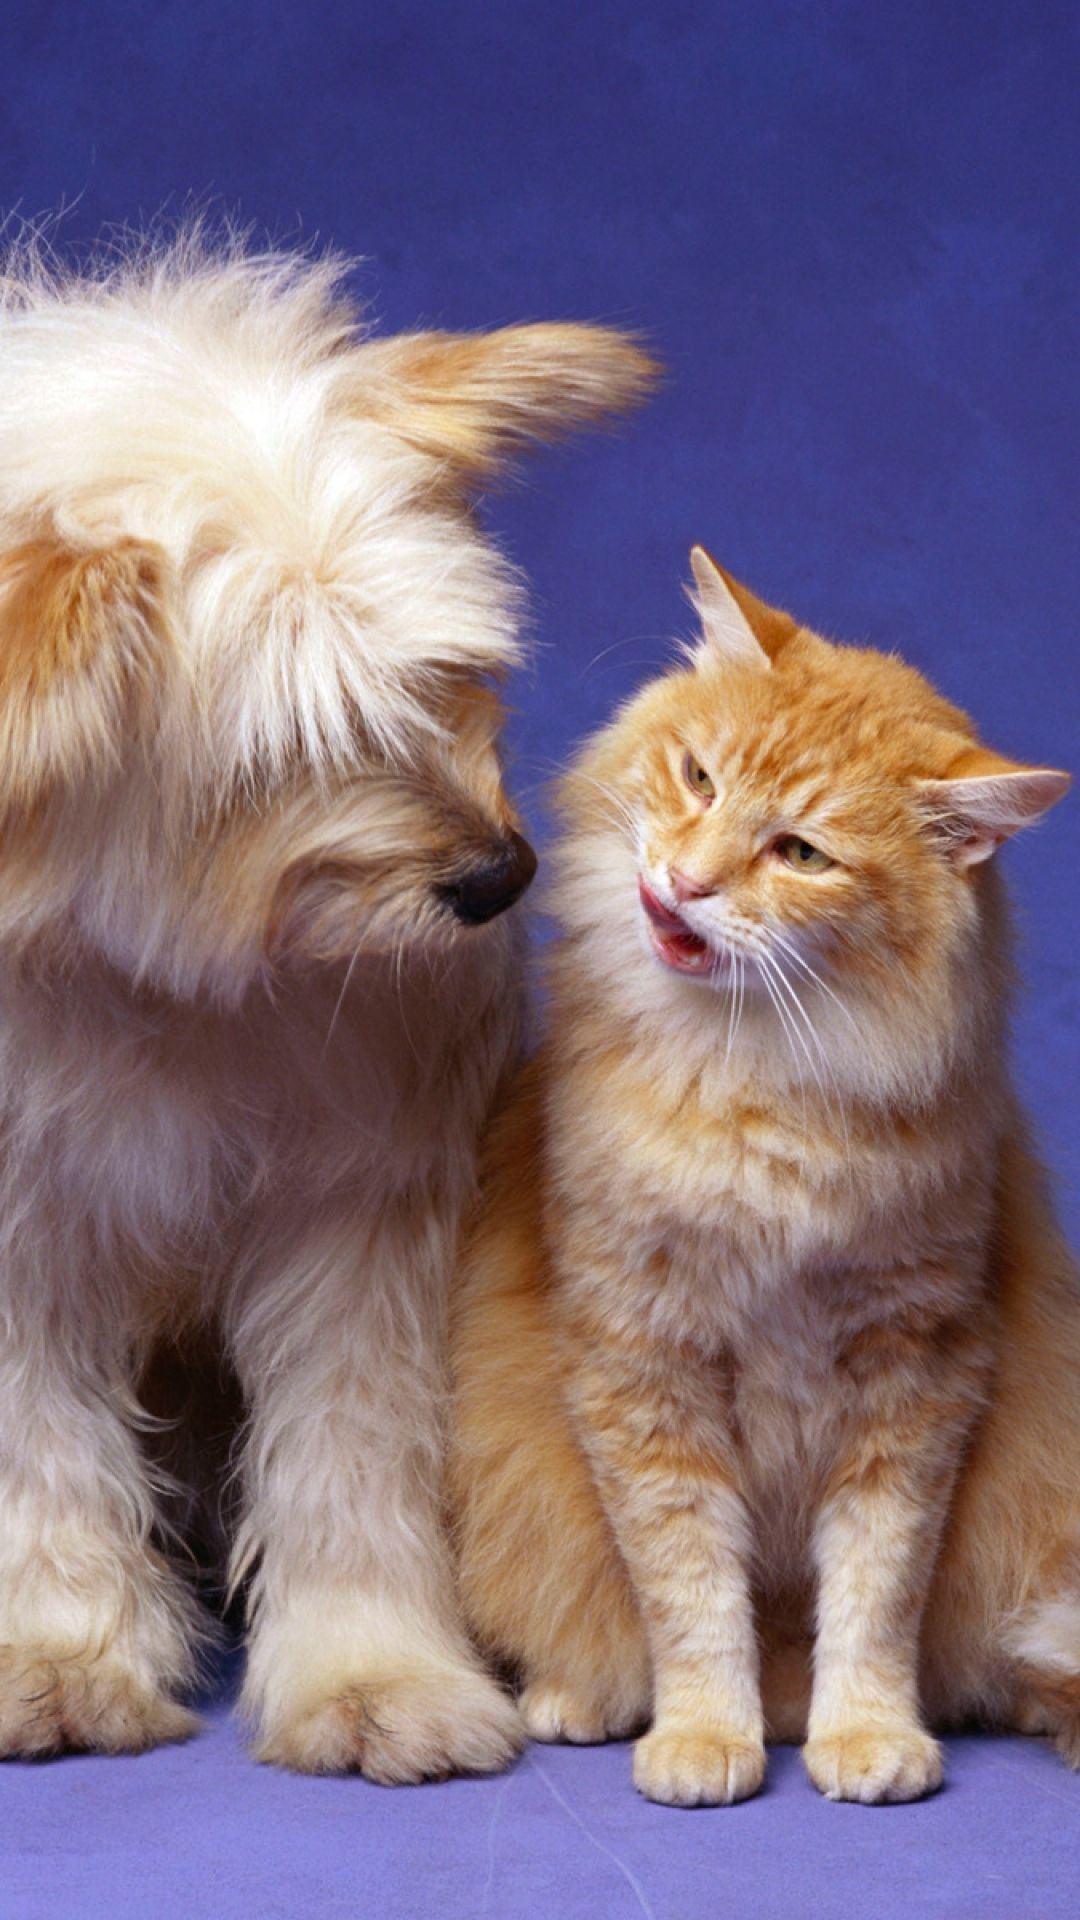 Cat And Dog Wallpapers For Mobile - HD Wallpaper 